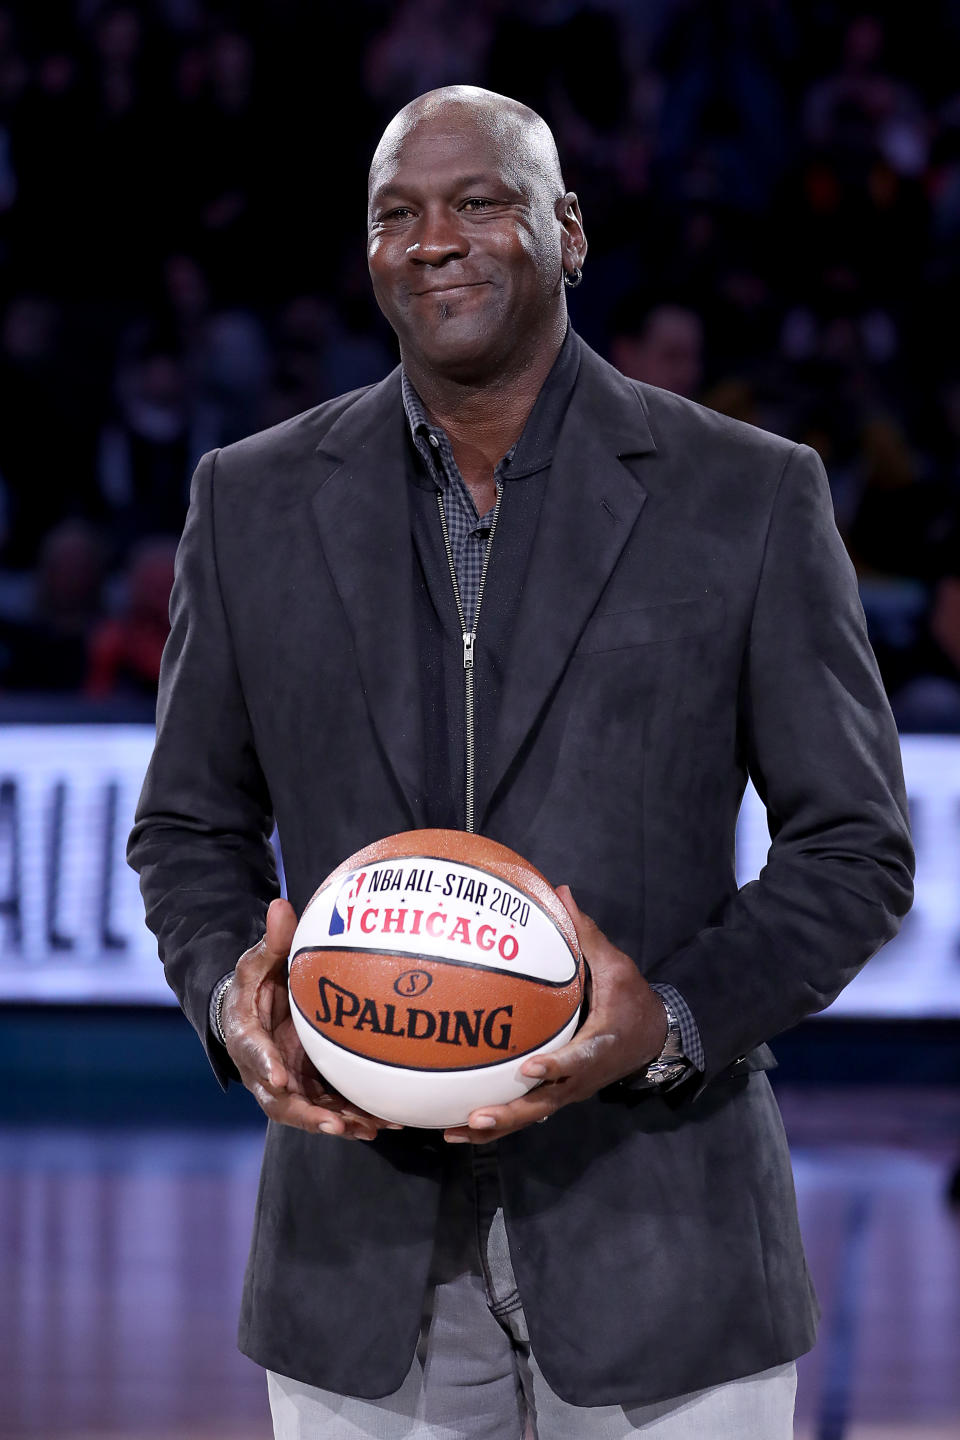 CHARLOTTE, NORTH CAROLINA - FEBRUARY 17:  Michael Jordan, owner of the Charlotte Hornets, takes part in a ceremony honoring the 2020 NBA All-Star game during a break in play as Team LeBron take on Team Giannis in the fourth quarter during the NBA All-Star game as part of the 2019 NBA All-Star Weekend at Spectrum Center on February 17, 2019 in Charlotte, North Carolina. Team LeBron won 178-164. NOTE TO USER: User expressly acknowledges and agrees that, by downloading and/or using this photograph, user is consenting to the terms and conditions of the Getty Images License Agreement.  (Photo by Streeter Lecka/Getty Images)